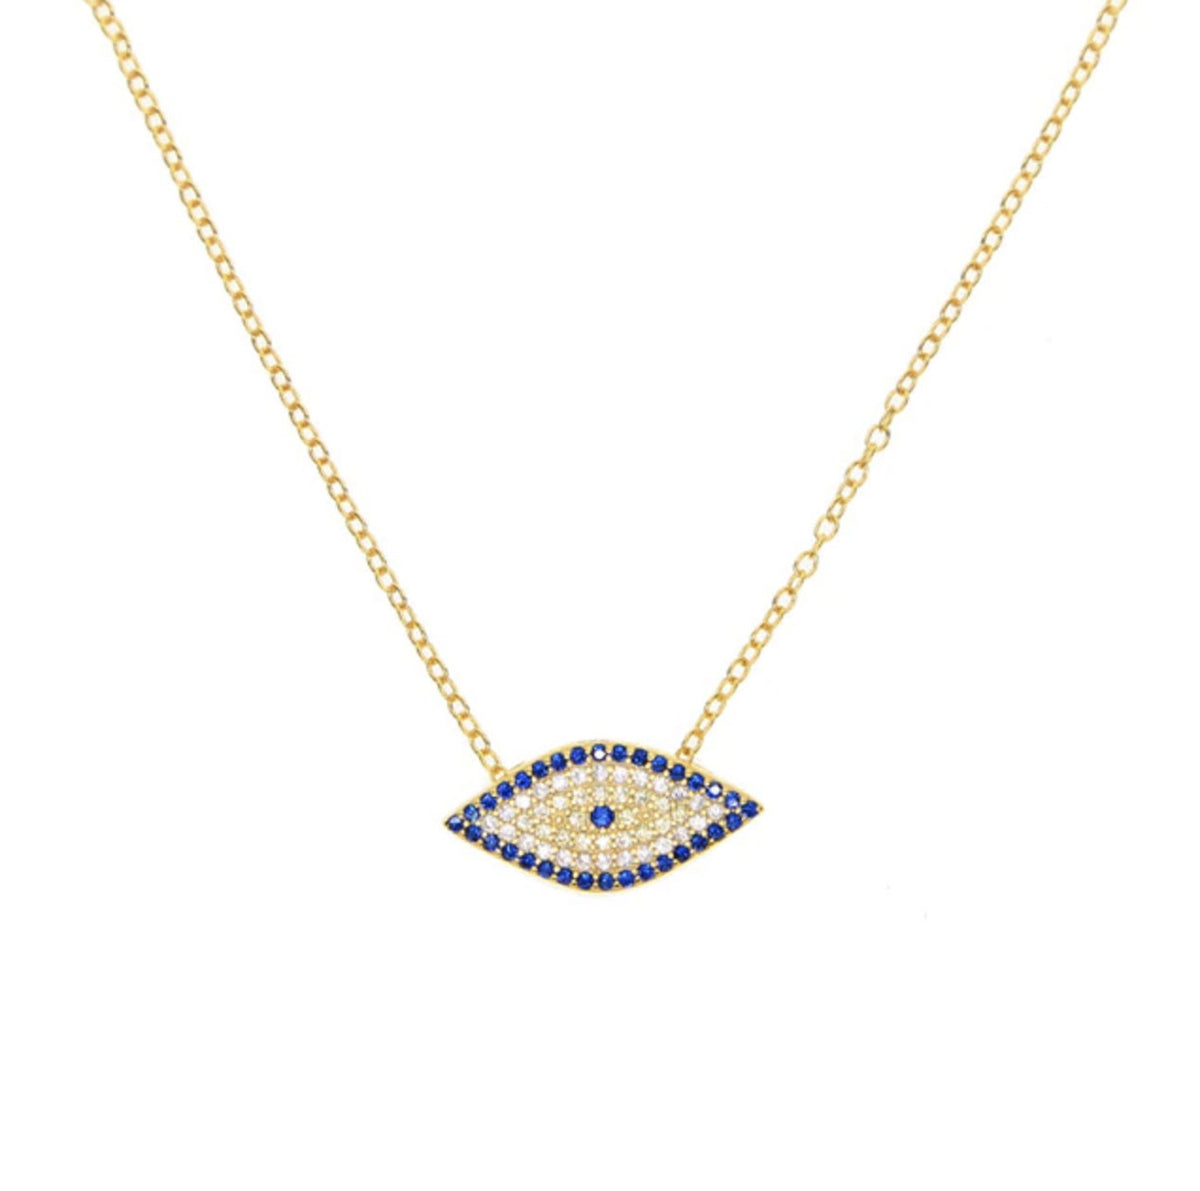 Luxe Time USA .925 Sterling Silver Gold Tone Evil Eye Necklace Chain Pendant w/ Ext